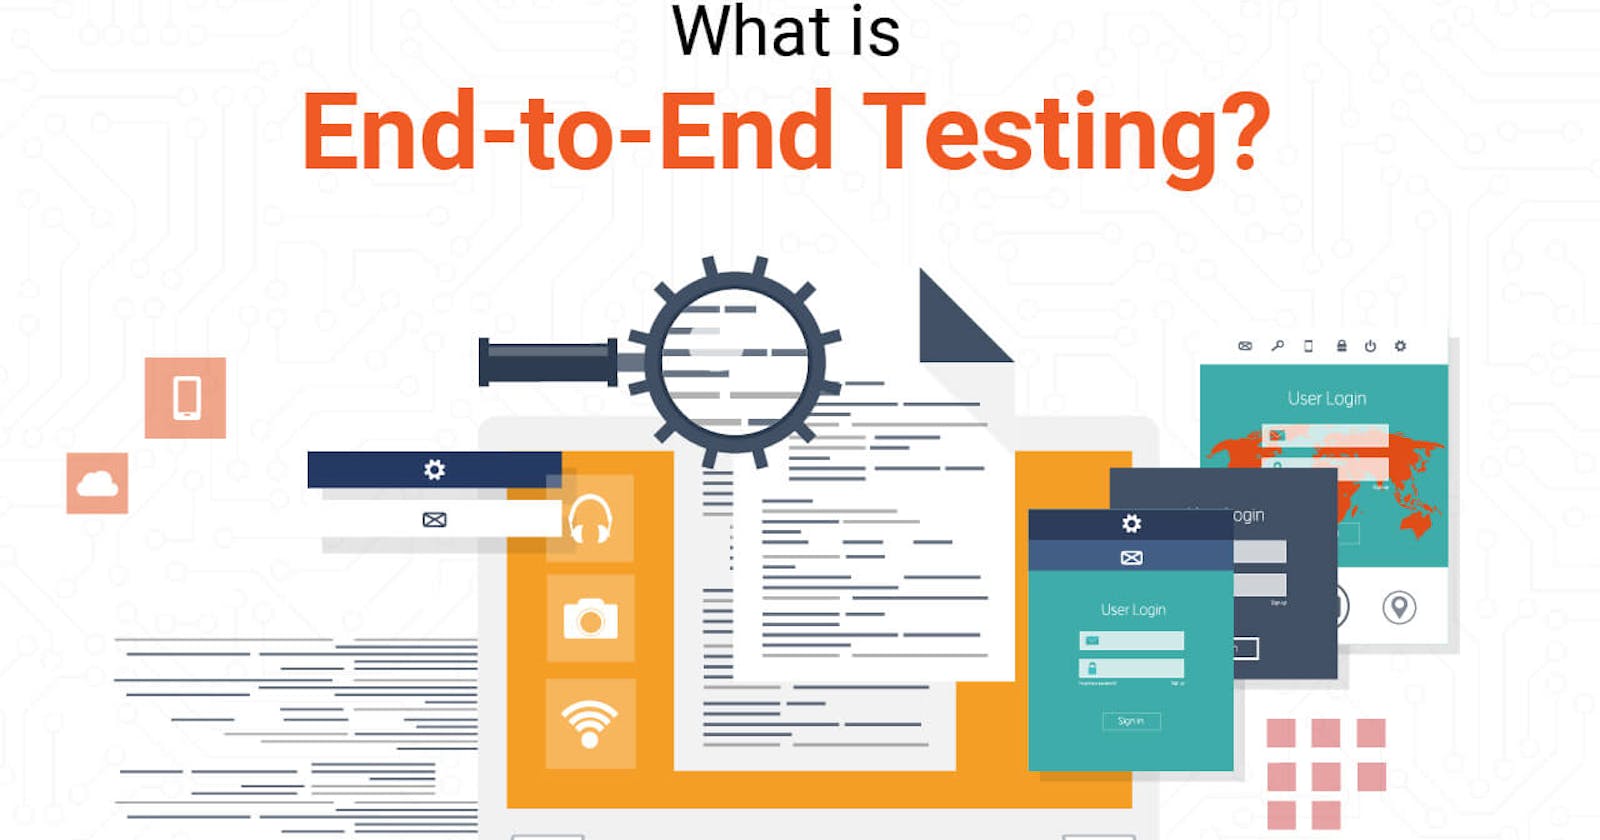 What is End-to-End Testing?